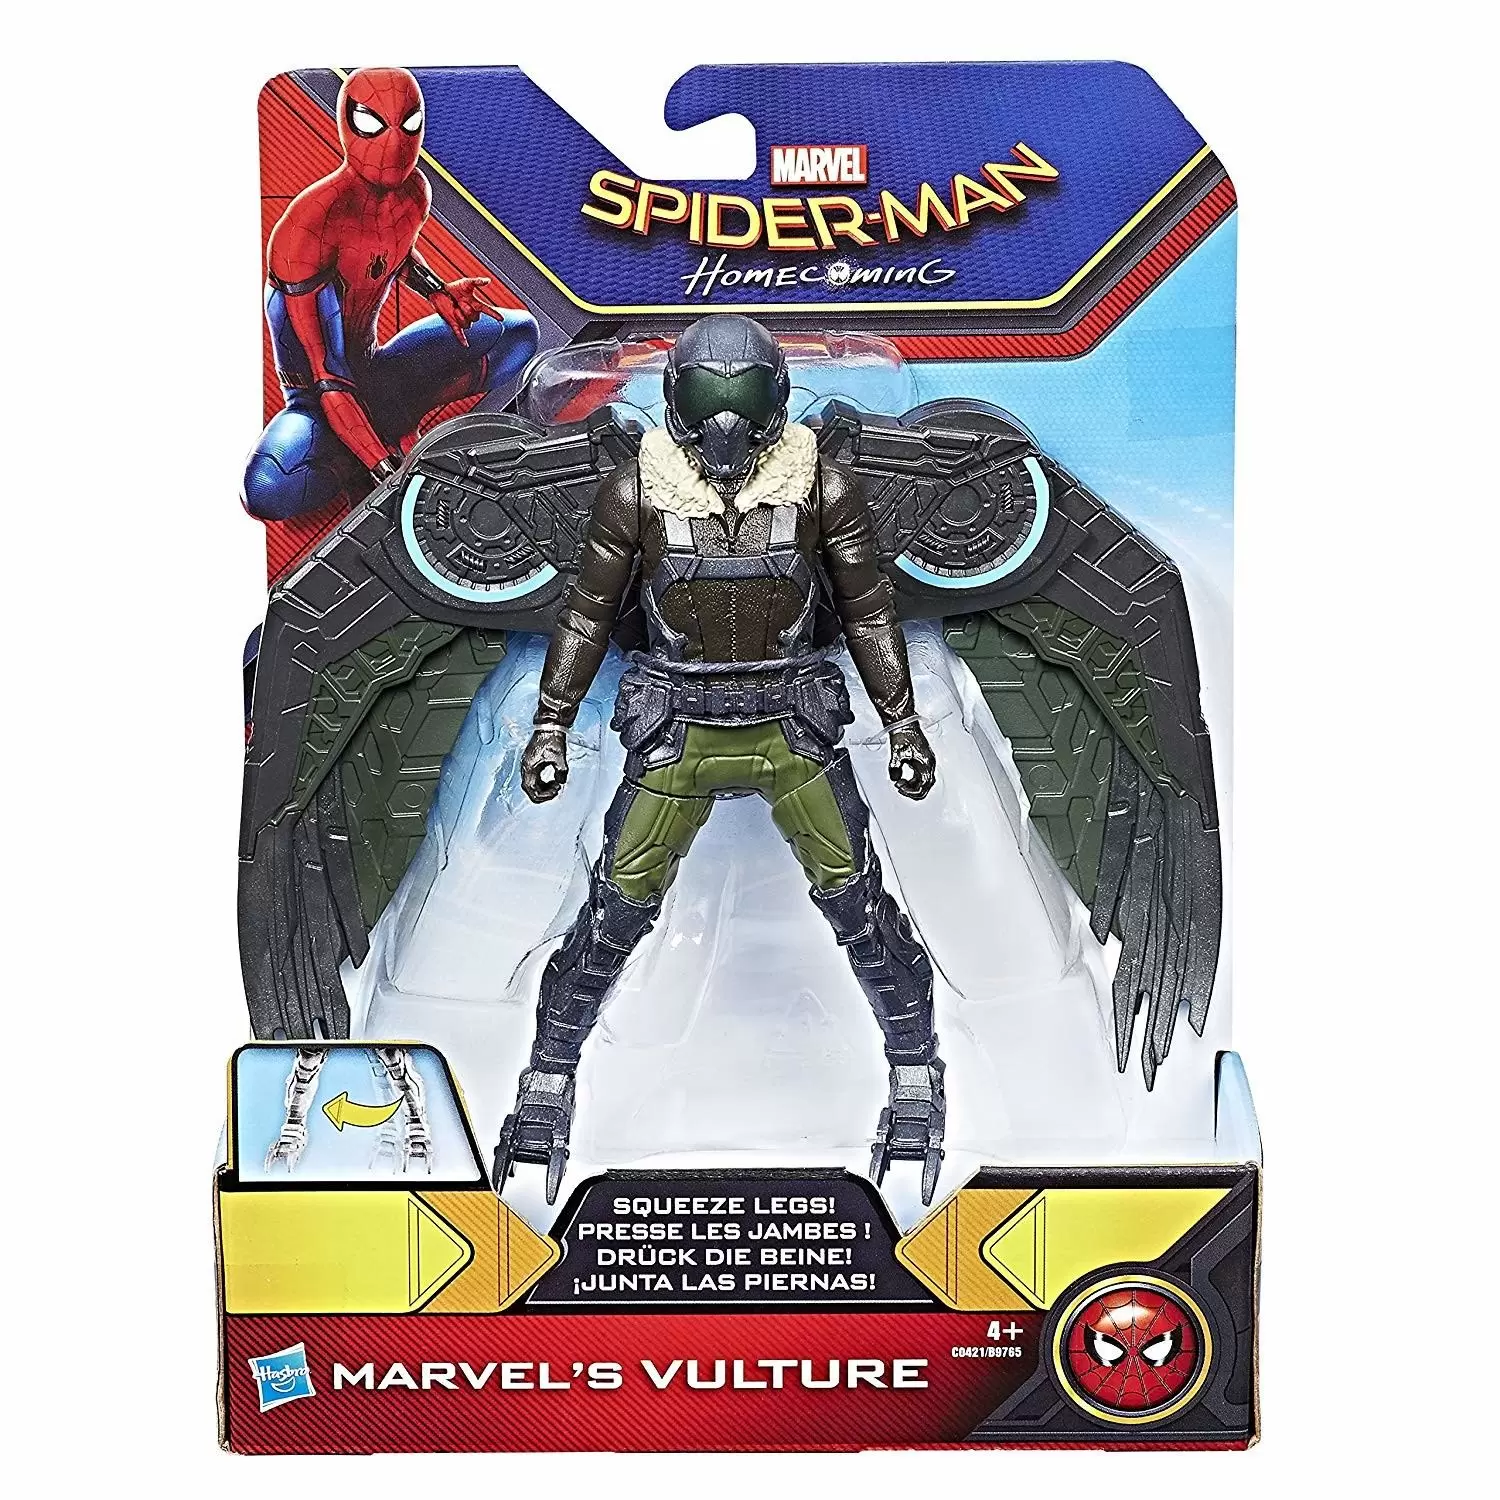 Spider-Man Homecoming Feature Action Figure Wave 1 Set - Spider-Man Homecoming - Marvel\'s Vulture